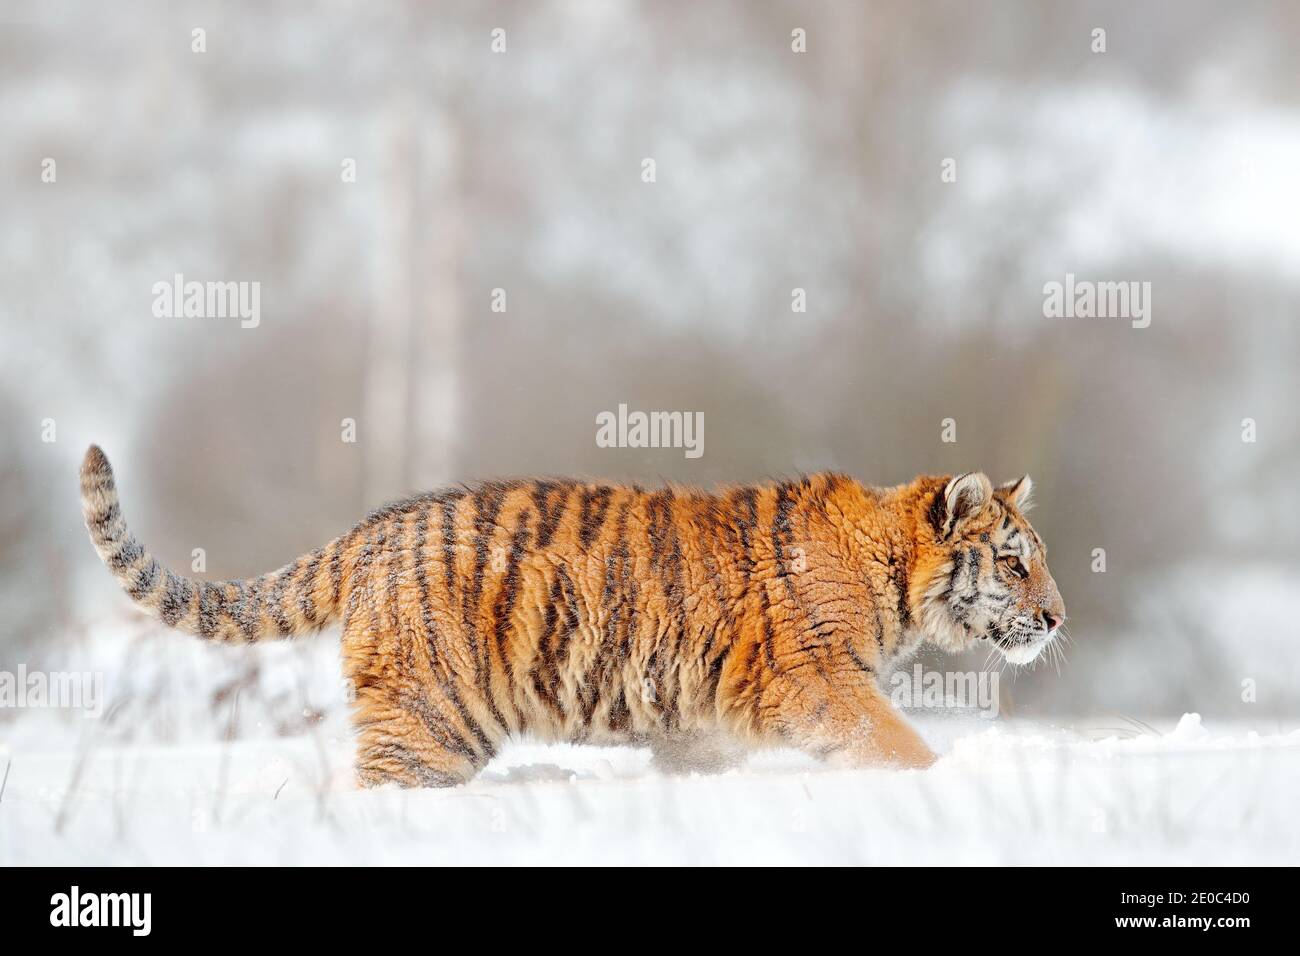 Tiger in wild winter nature, running in snow storm. Siberian tiger, Panthera tigris altaica. Action wildlife scene with dangerous animal. Cold winter Stock Photo